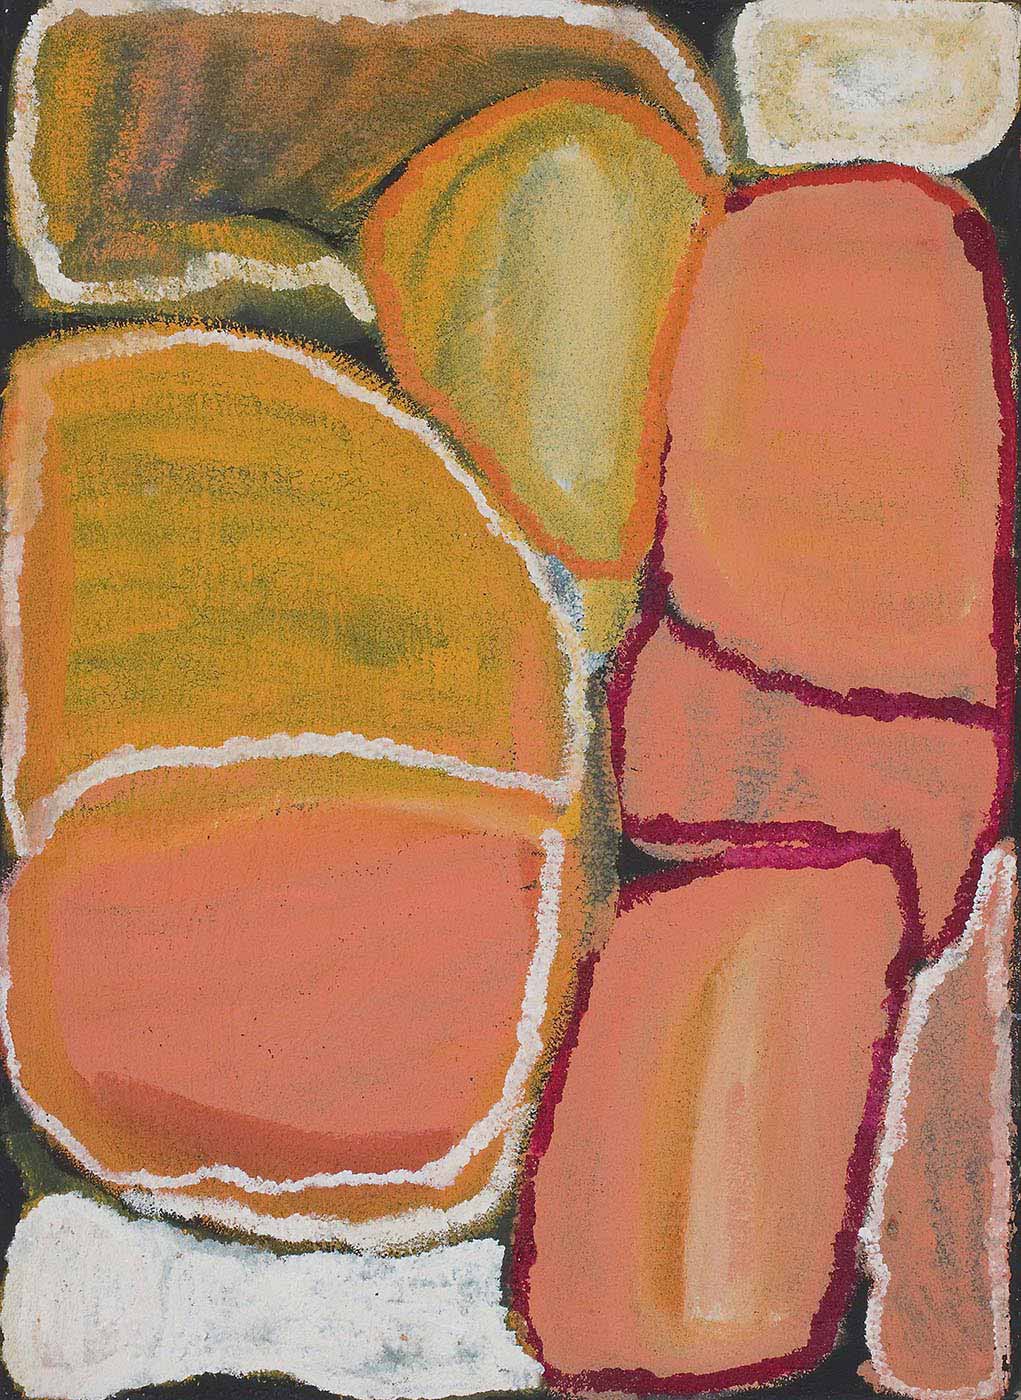 An orange toned painting on brown linen of boulder-like shapes on a black background. The left of the painting has an oval shape in yellow-orange and pink-orange with a white edge and horizontal line across the middle. Underneath this shape is a white filled shape while above it is a translucent shape in yellow-pink with a white edge. At the centre top is a rounded triangle shape of yellow-white with an orange edge. On the right of the painting is a stack of three orange-pink shapes with burgundy outlines, with a yellow-white shape above and a translucent orange shape in the bottom right corner. - click to view larger image